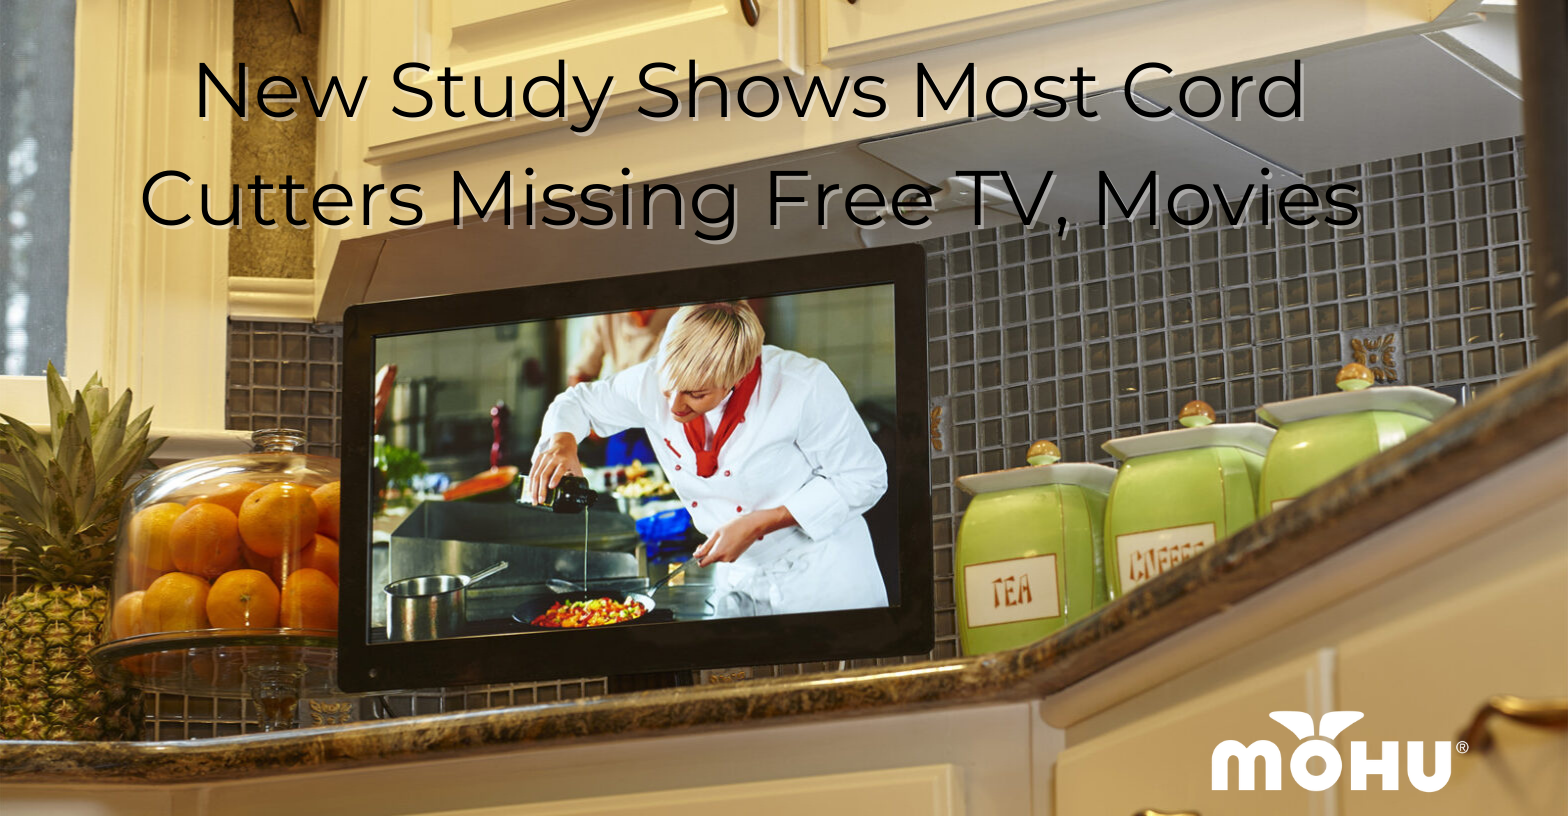 New Study Shows Most Cord Cutters Missing Free TV, Movies